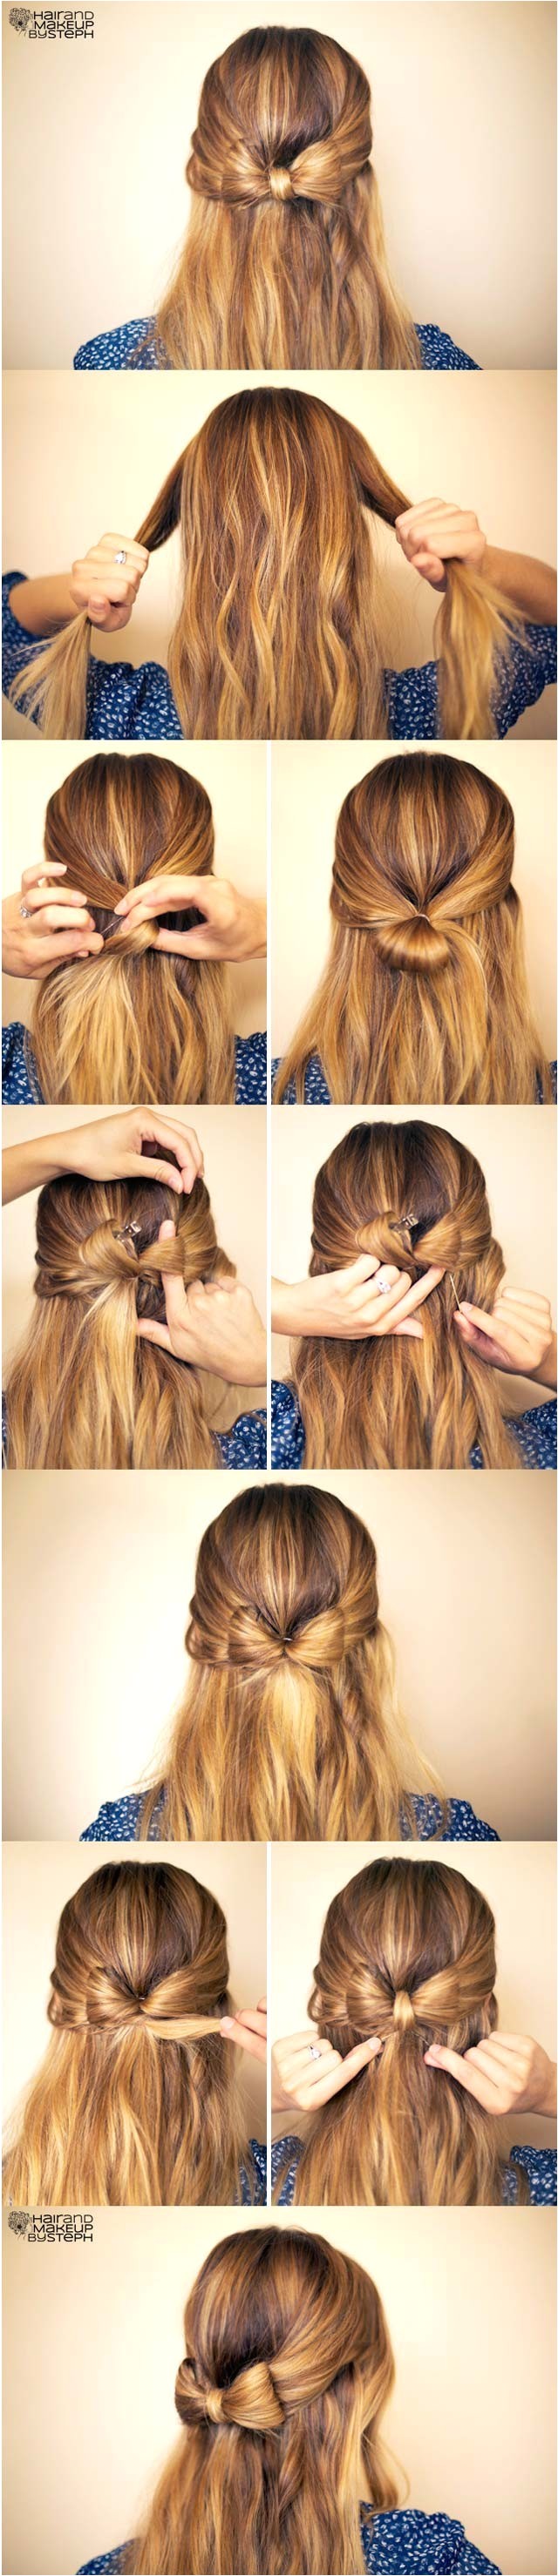 Steps for Easy Hairstyles 15 Cute Hairstyles Step by Step Hairstyles for Long Hair